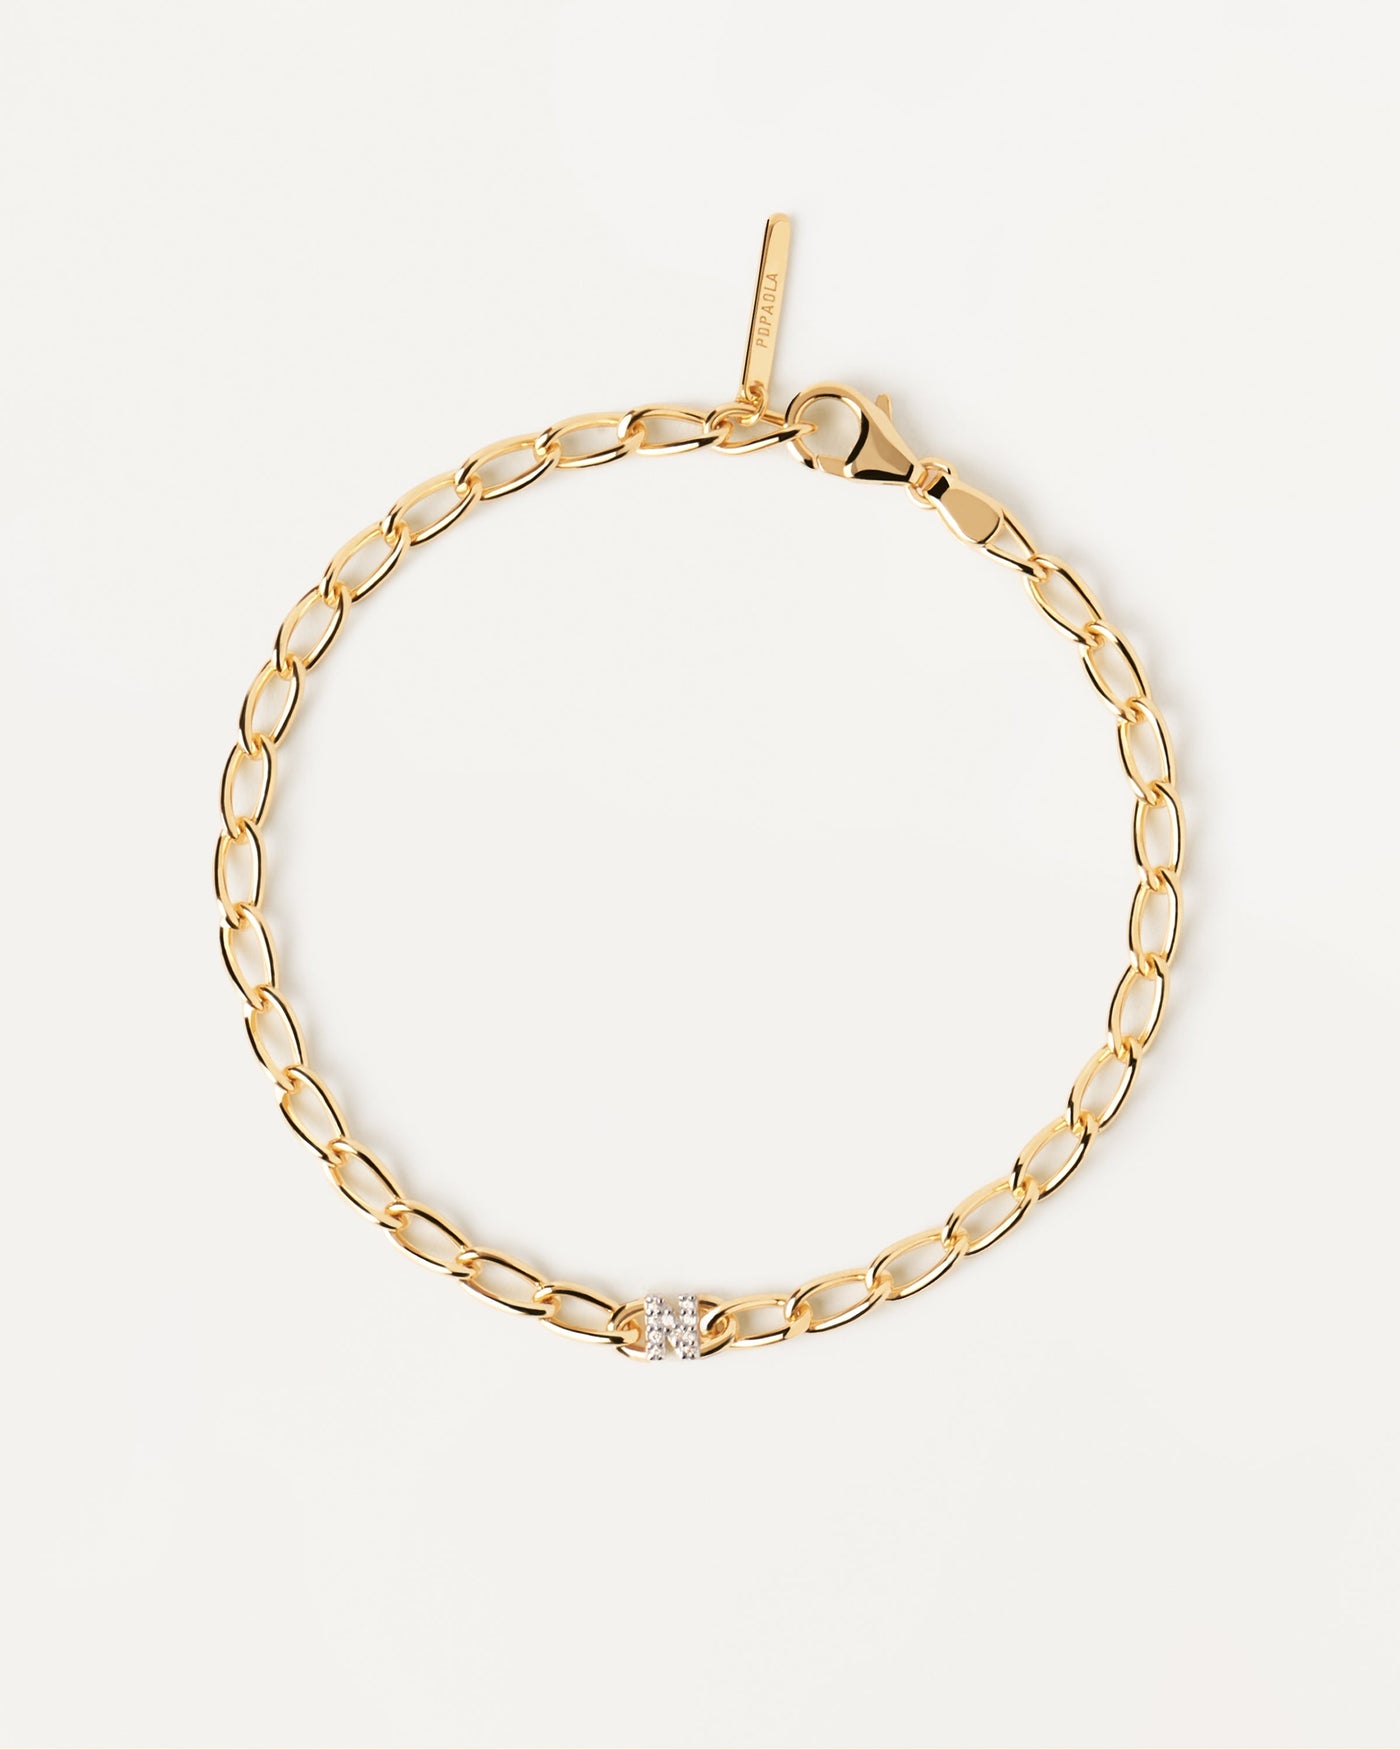 2023 Selection | Letter N Chain Bracelet. cable chain bracelet in gold-plated silver with initial N in zirconia. Get the latest arrival from PDPAOLA. Place your order safely and get this Best Seller. Free Shipping.